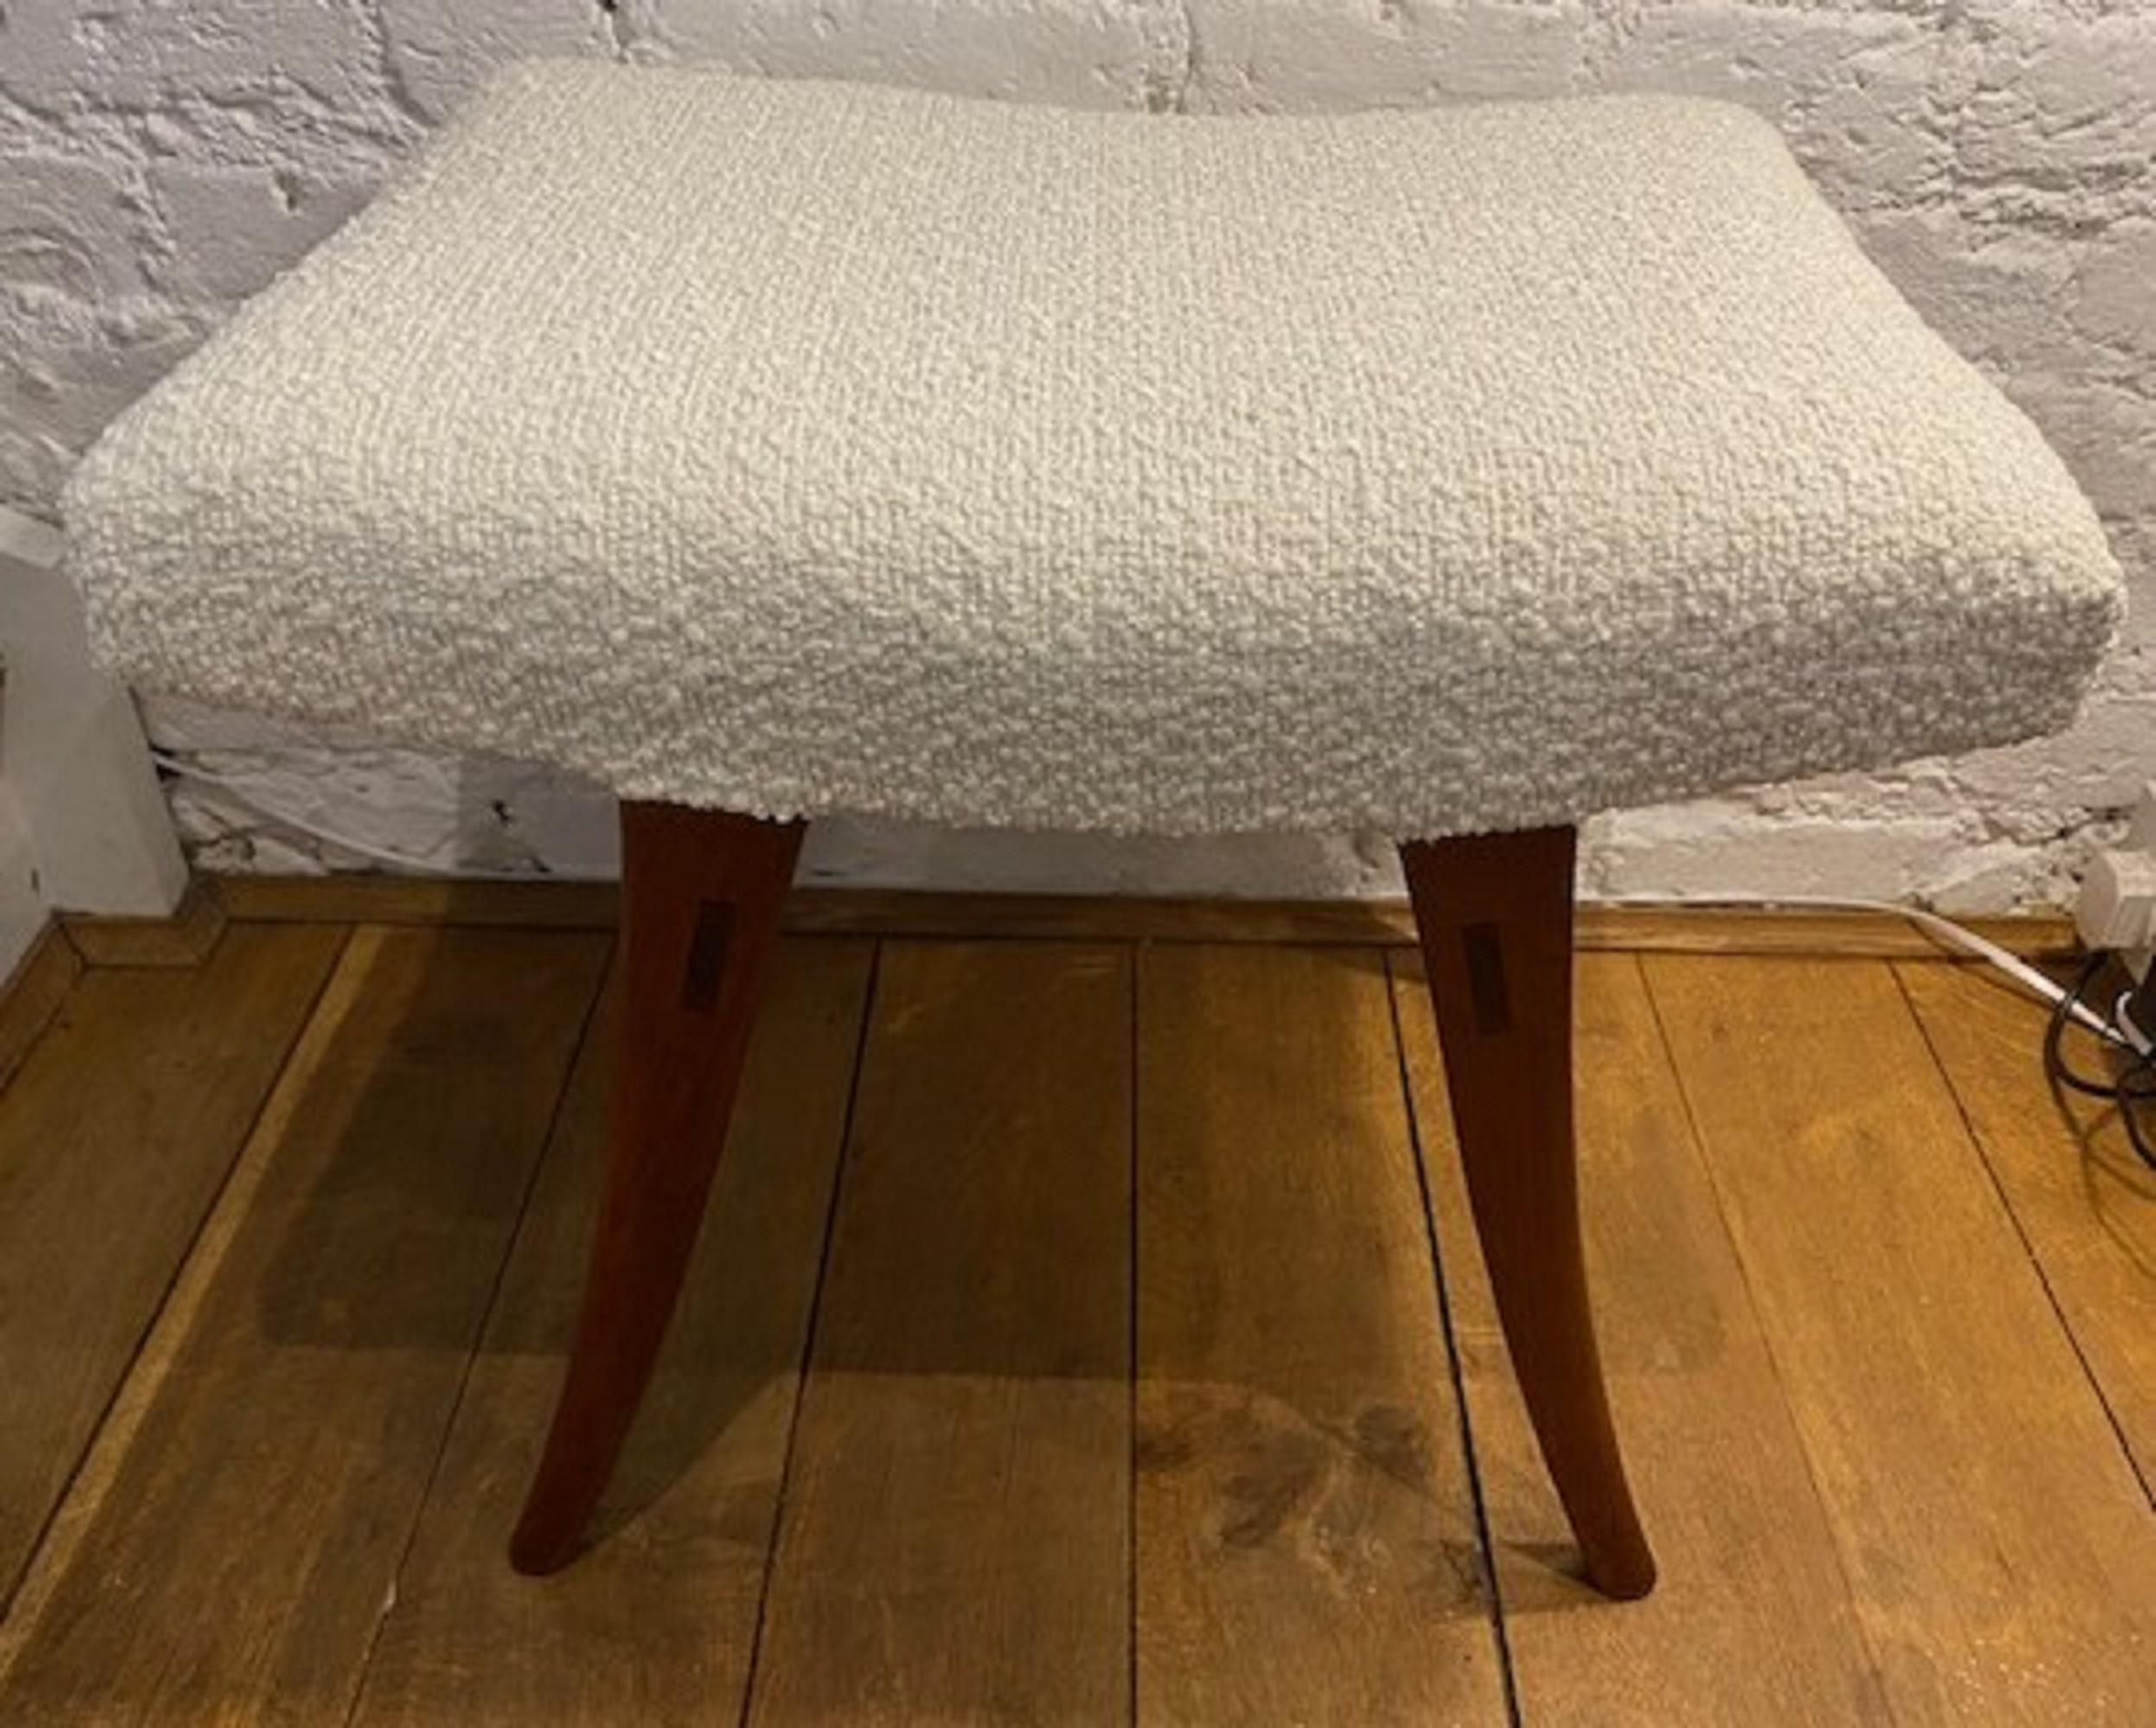 Mid-Century Teak Upholstered Dressing Table Stool, Denmark, C. 1960s

An elegant teak dressing table stool, with 4 legs, with a wood joint a feature in a darker teak. Upholstered in a cream boucle fabric.  A lovely addition to any mid-century modern